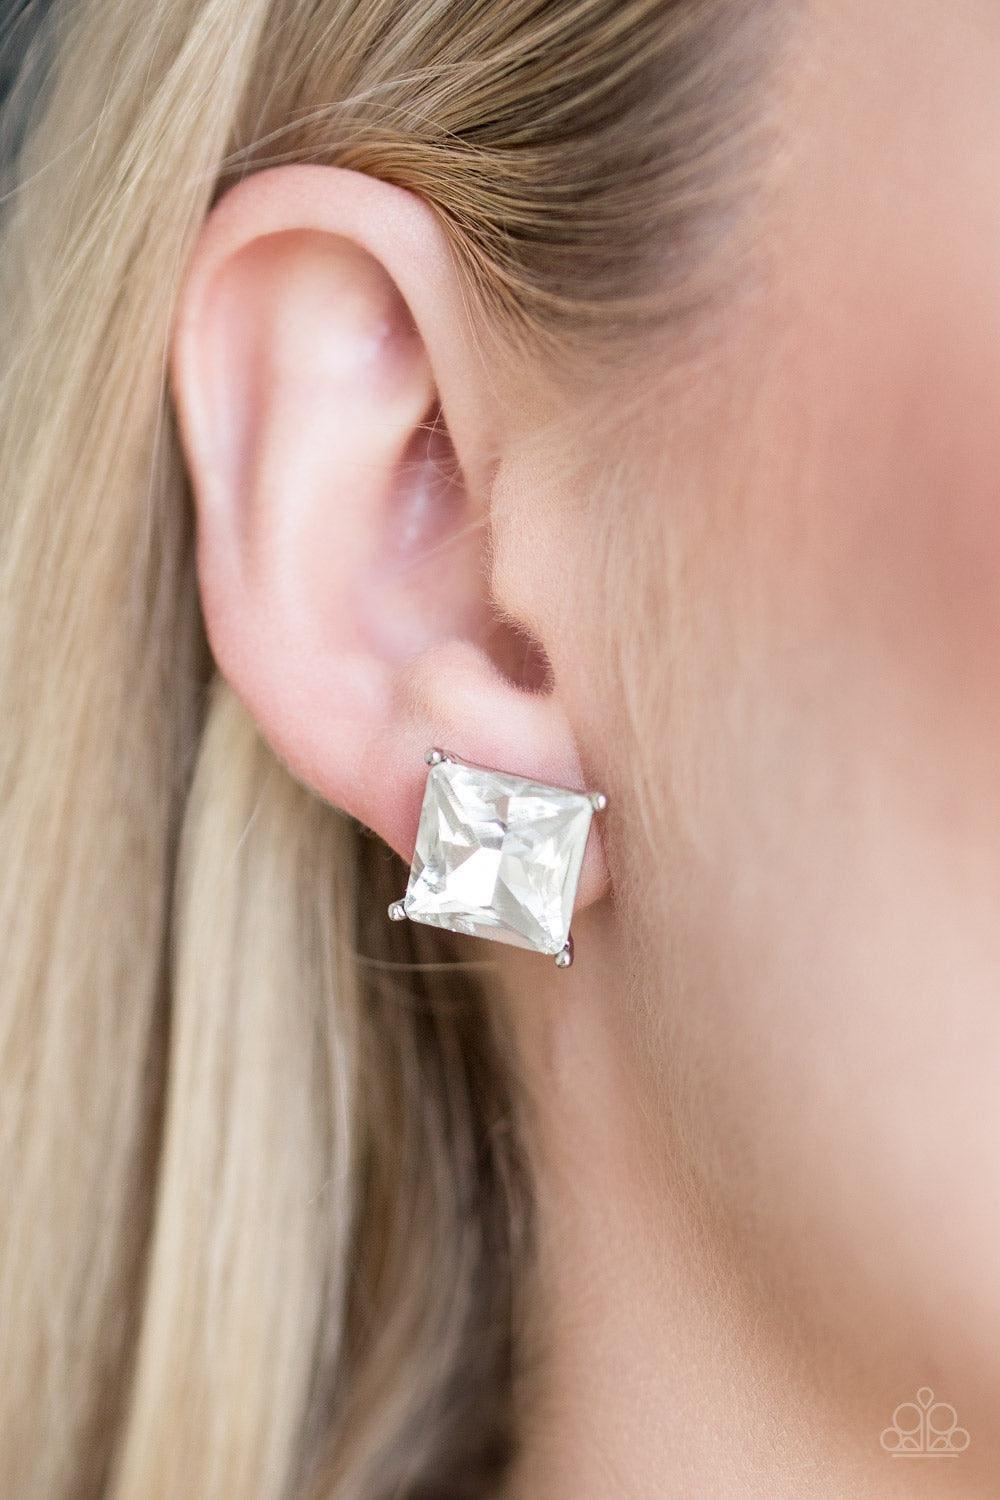 Paparazzi Accessories - The Big Bang - White Post Earrings - Bling by JessieK